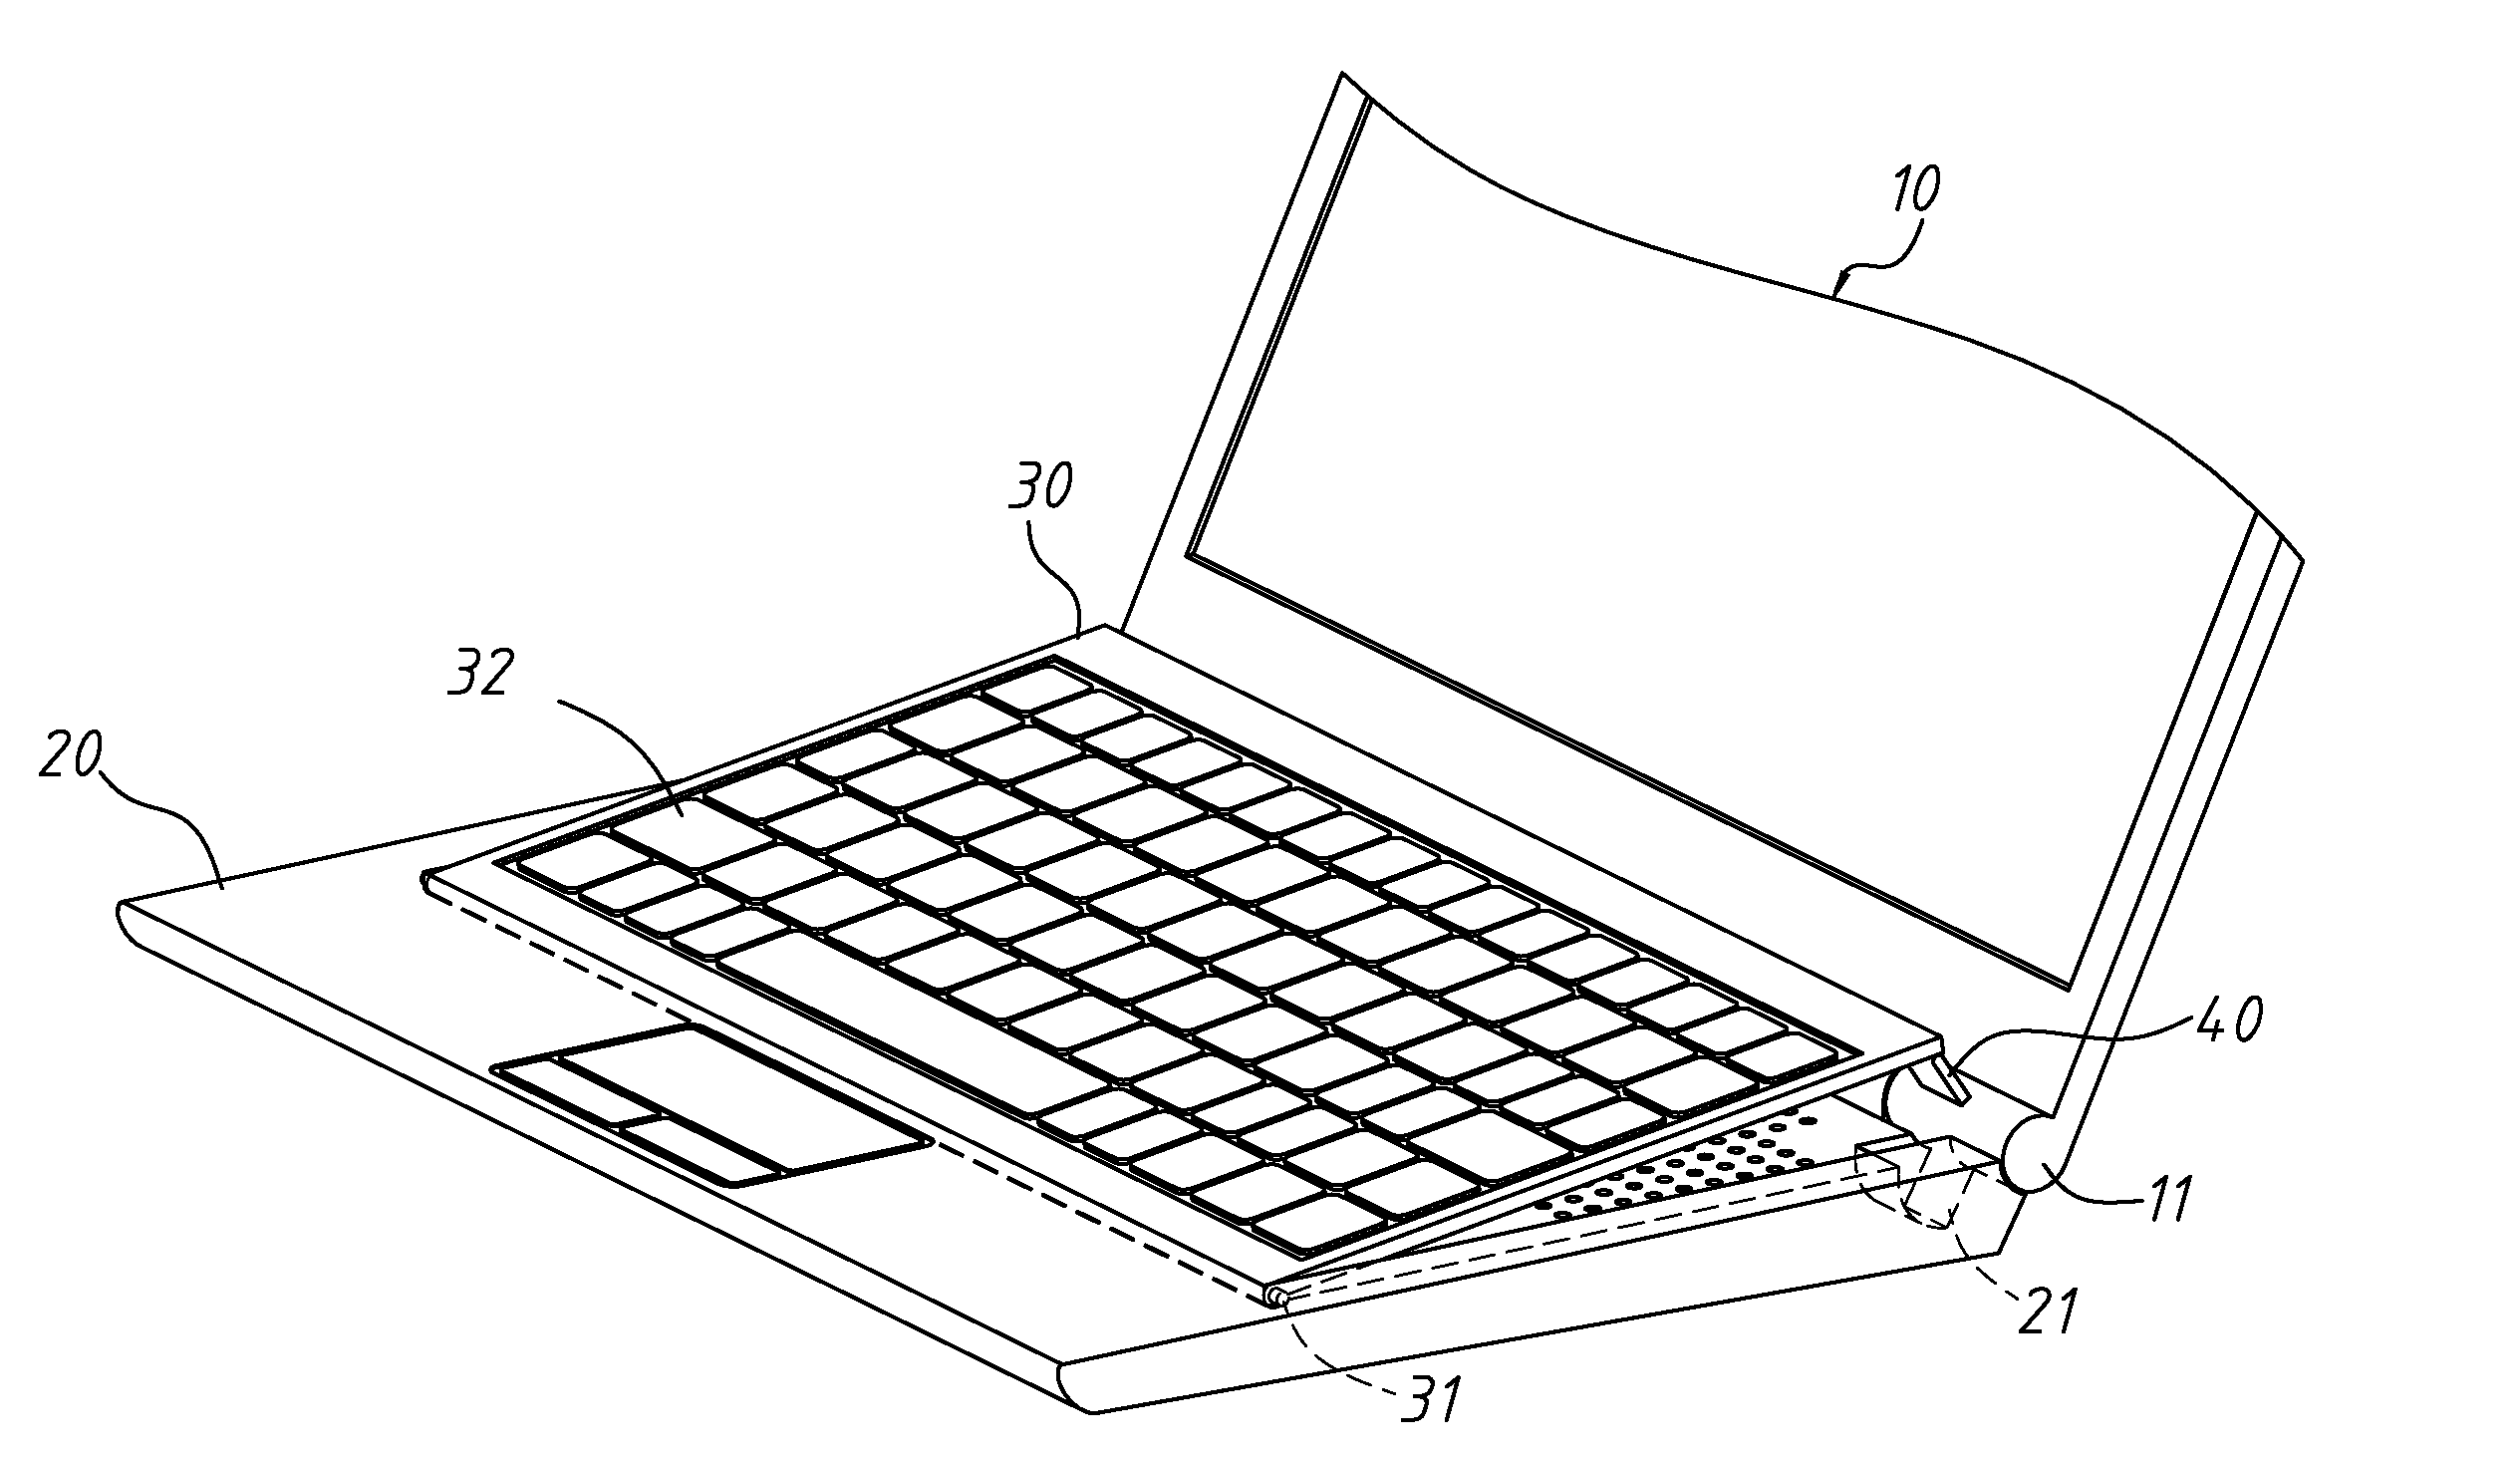 Portable electronic device with an actuating element to lift input/output modules